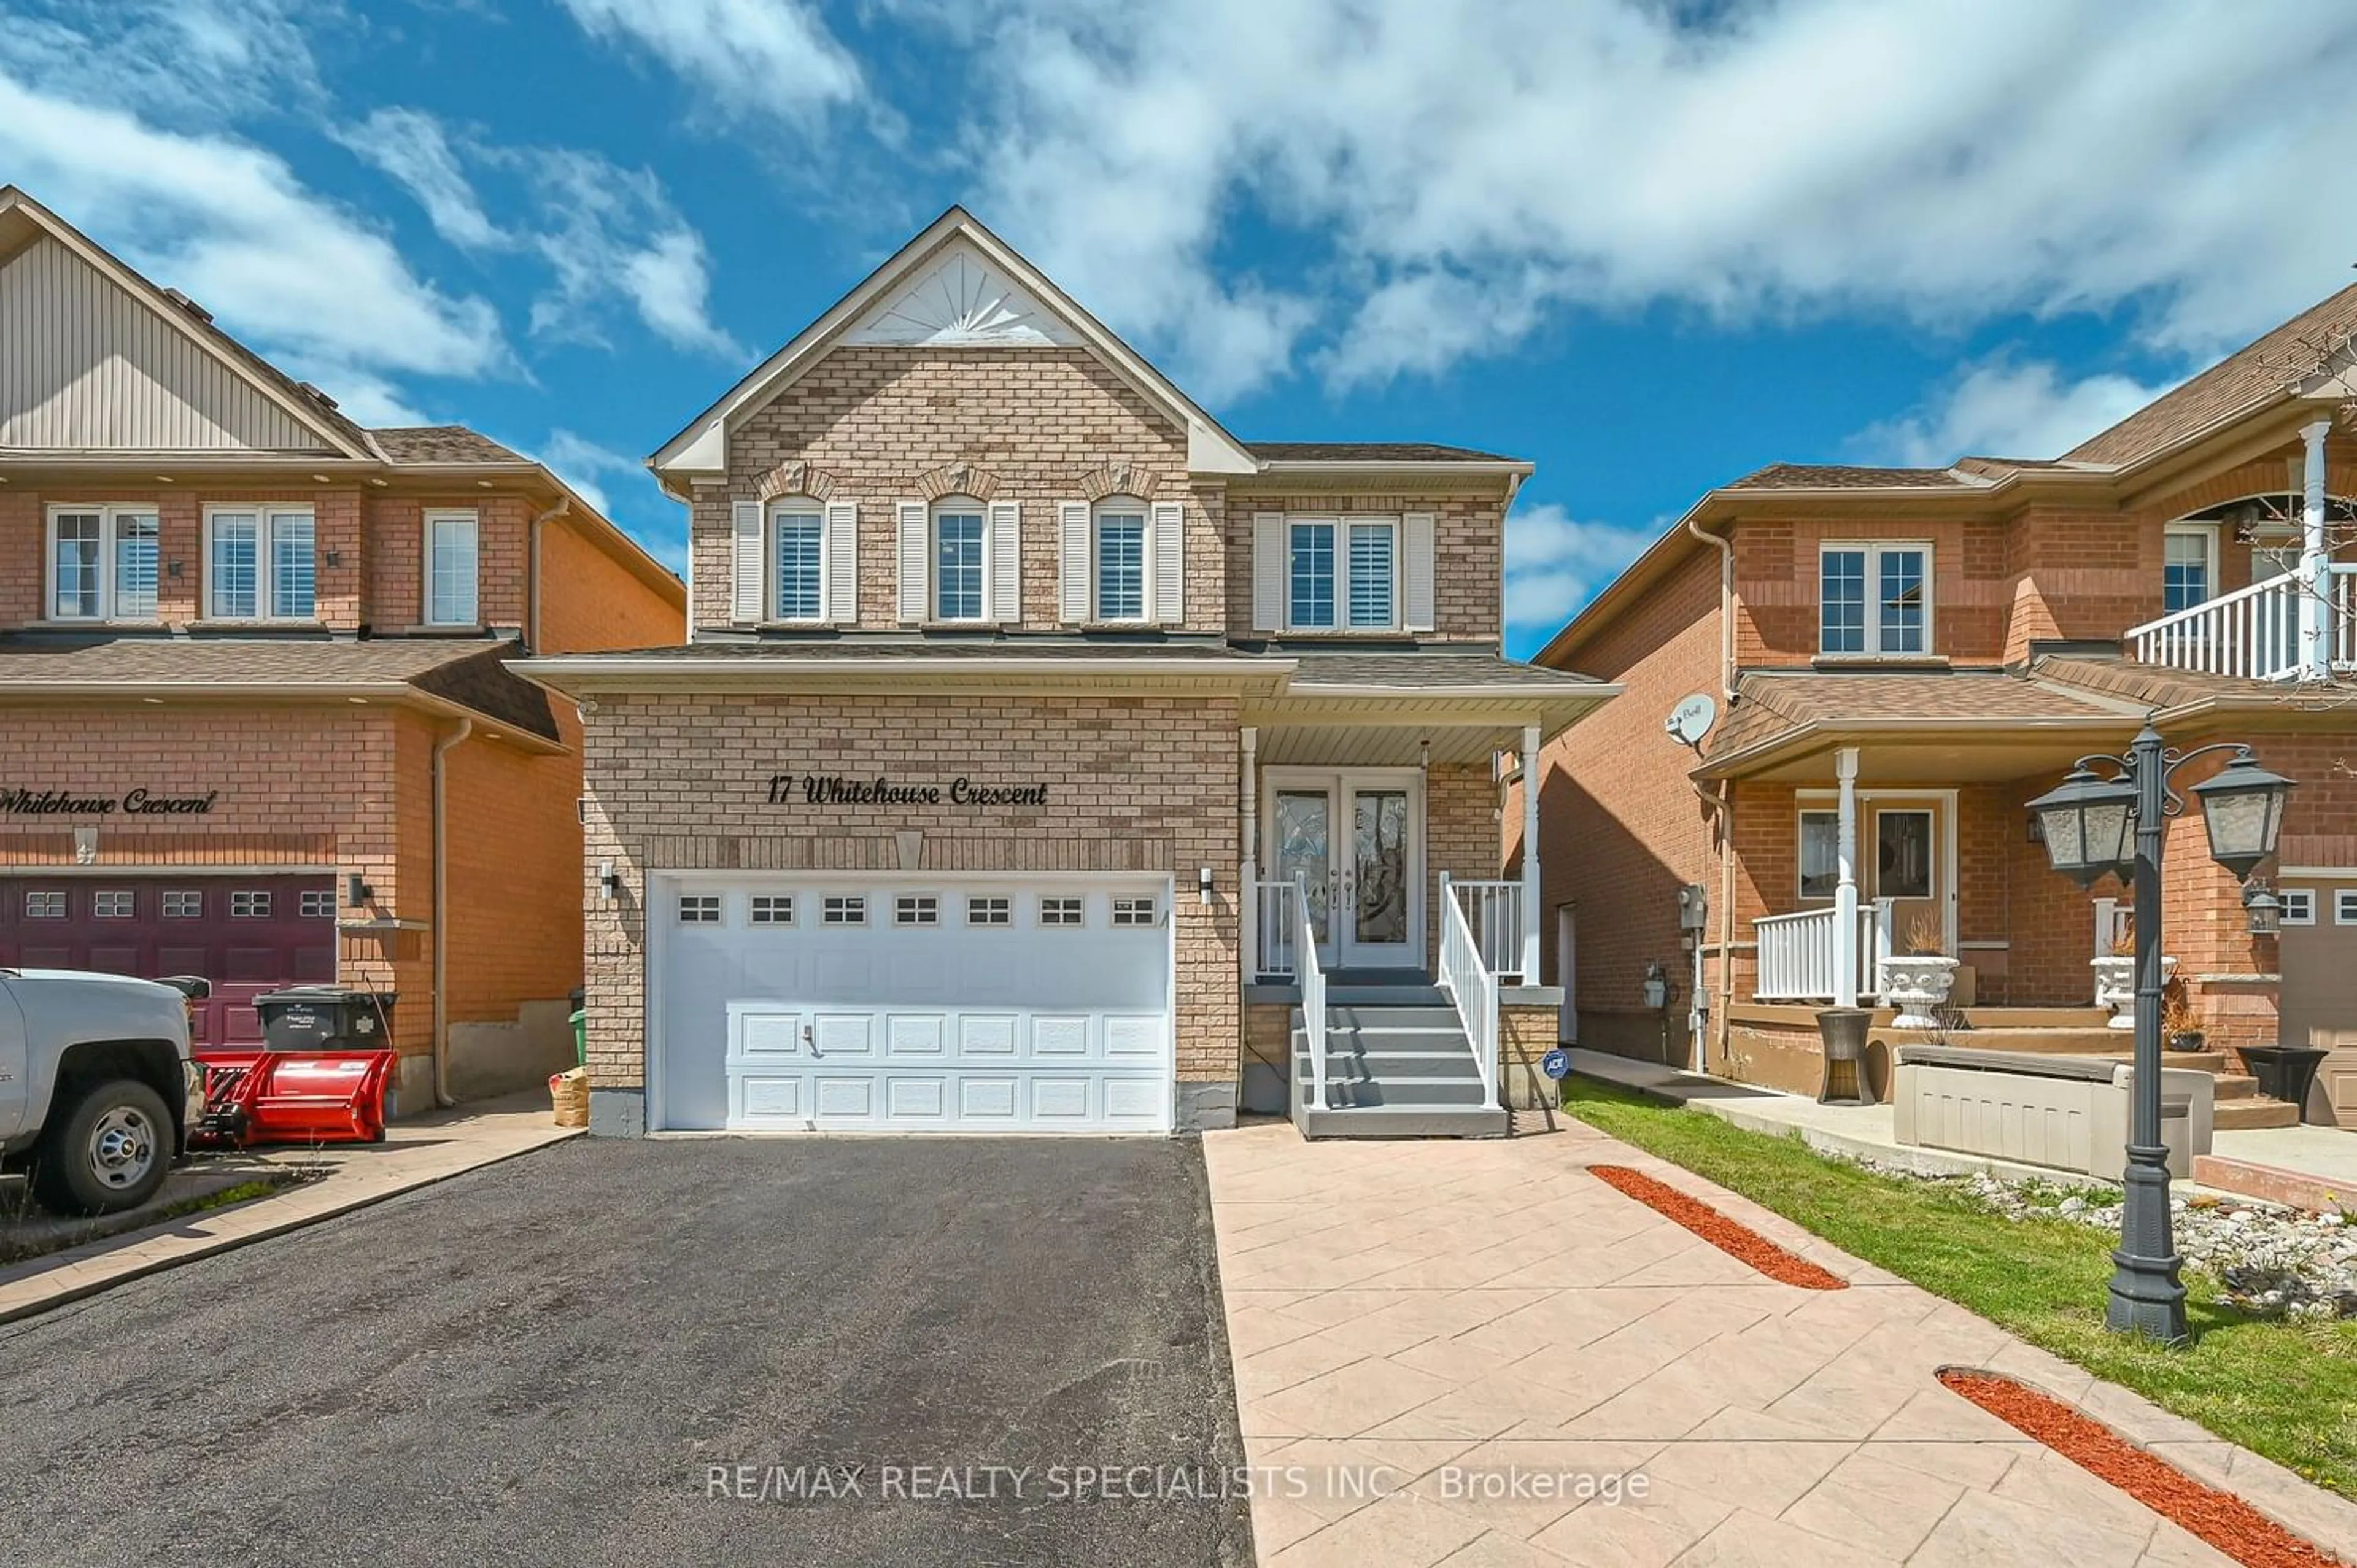 Home with brick exterior material for 17 Whitehouse Cres, Brampton Ontario L6P 1L6